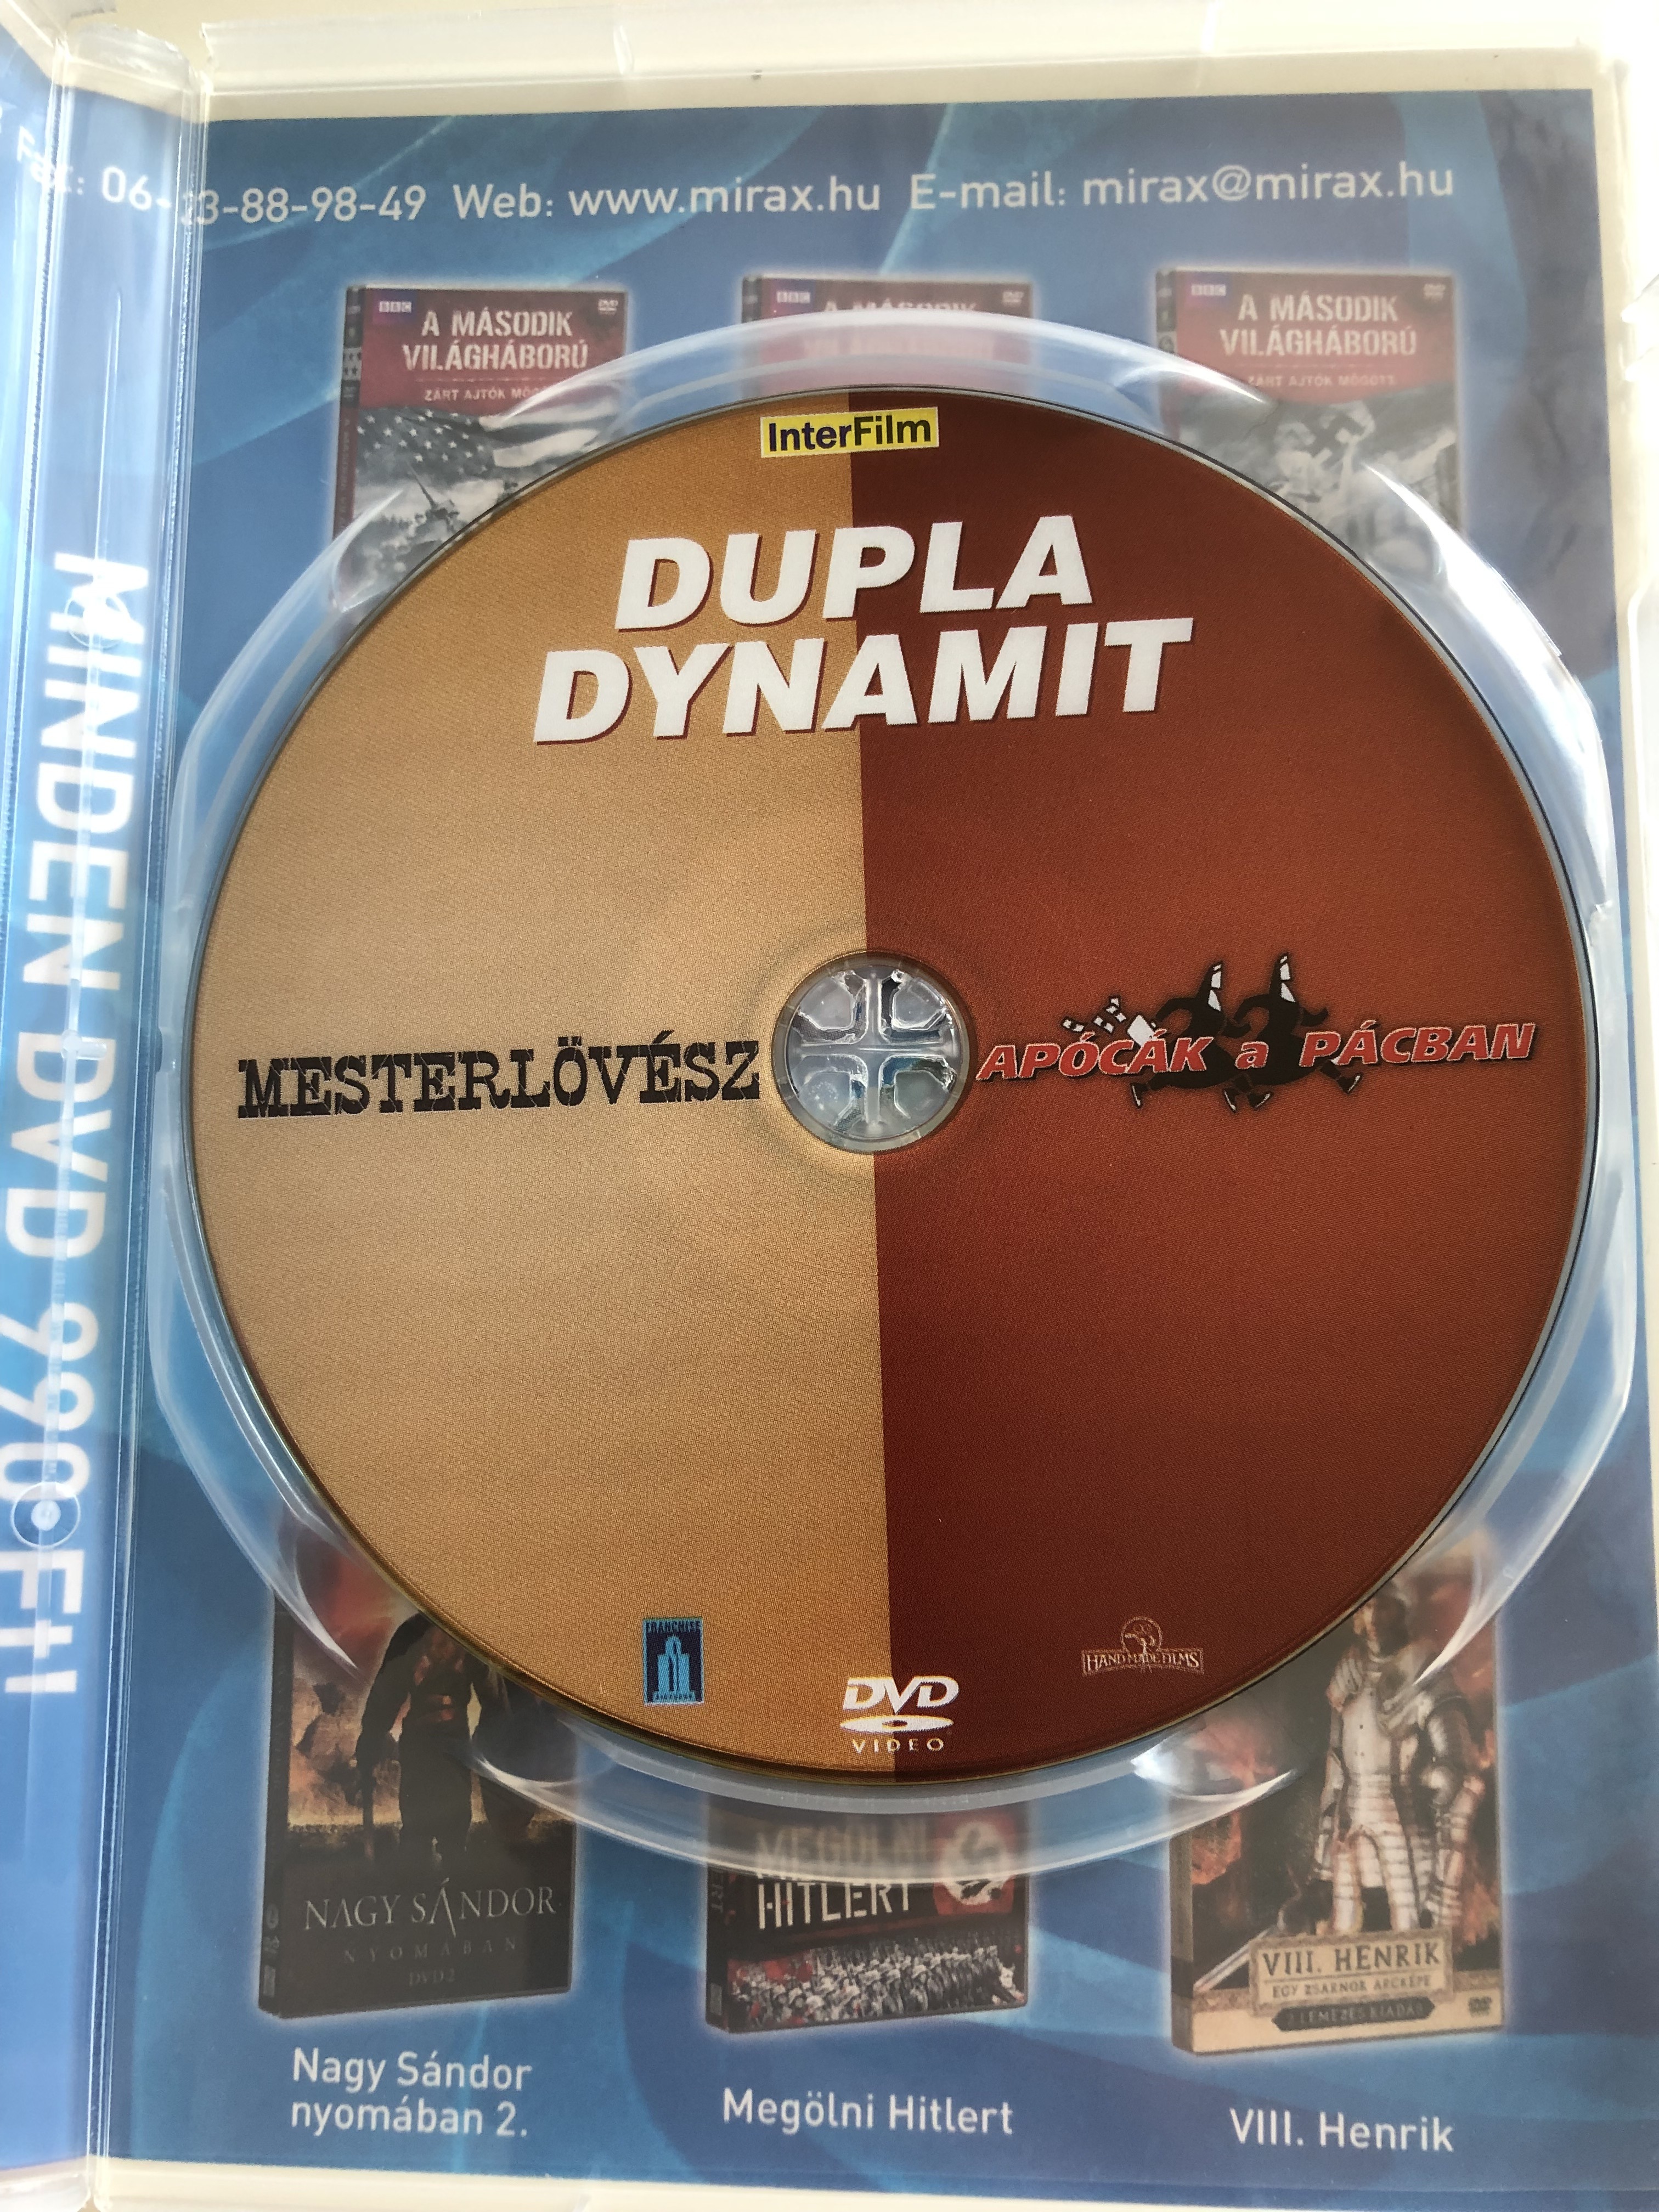 dupla-dynamit-the-shooter-1997-mesterl-v-sz-directed-by-fred-olen-ray-starring-michael-dudikoff-randy-travis-william-smith-nuns-on-the-run-1990-ap-c-k-a-p-cban-directed-by-jonathan-lynn-starring-eric-idle-robbie-.jpg